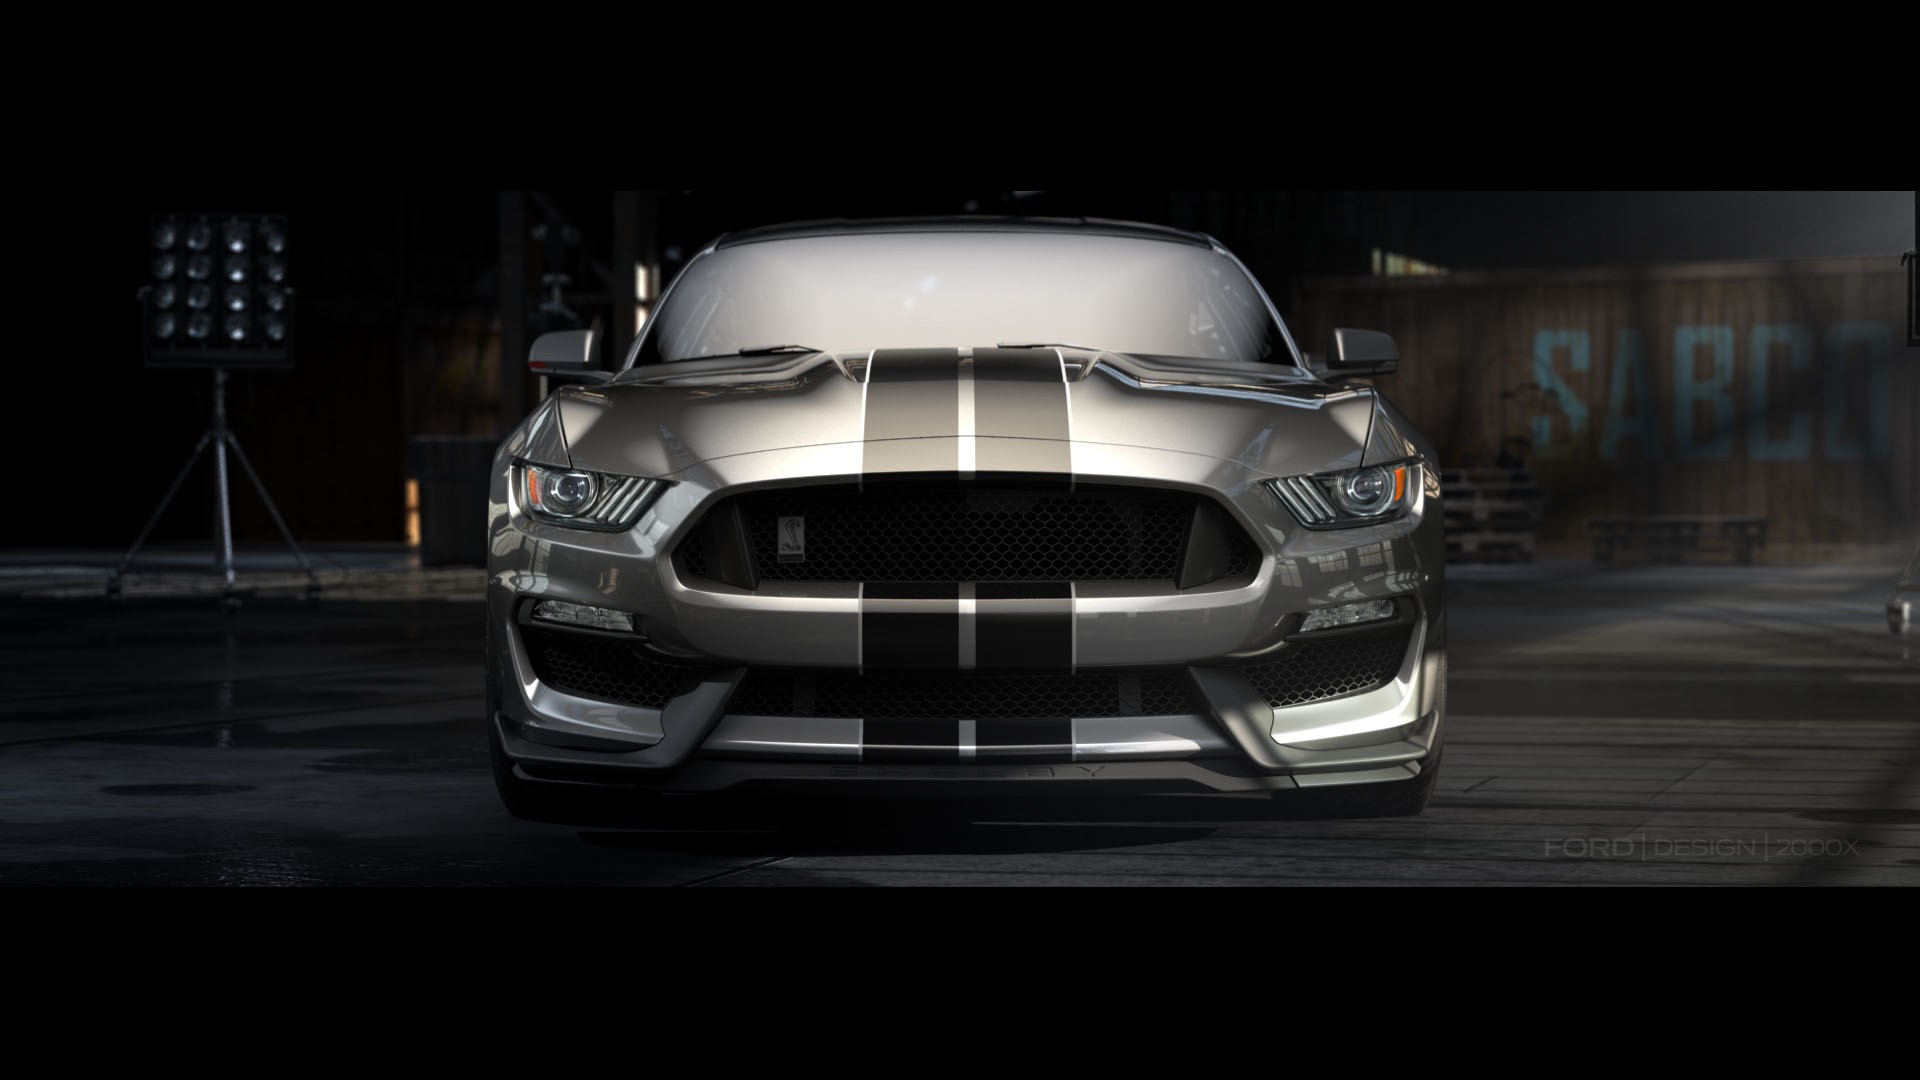 General 1920x1080 car Ford Mustang Shelby Ford Ford Mustang Shelby vehicle silver cars racing stripes American cars